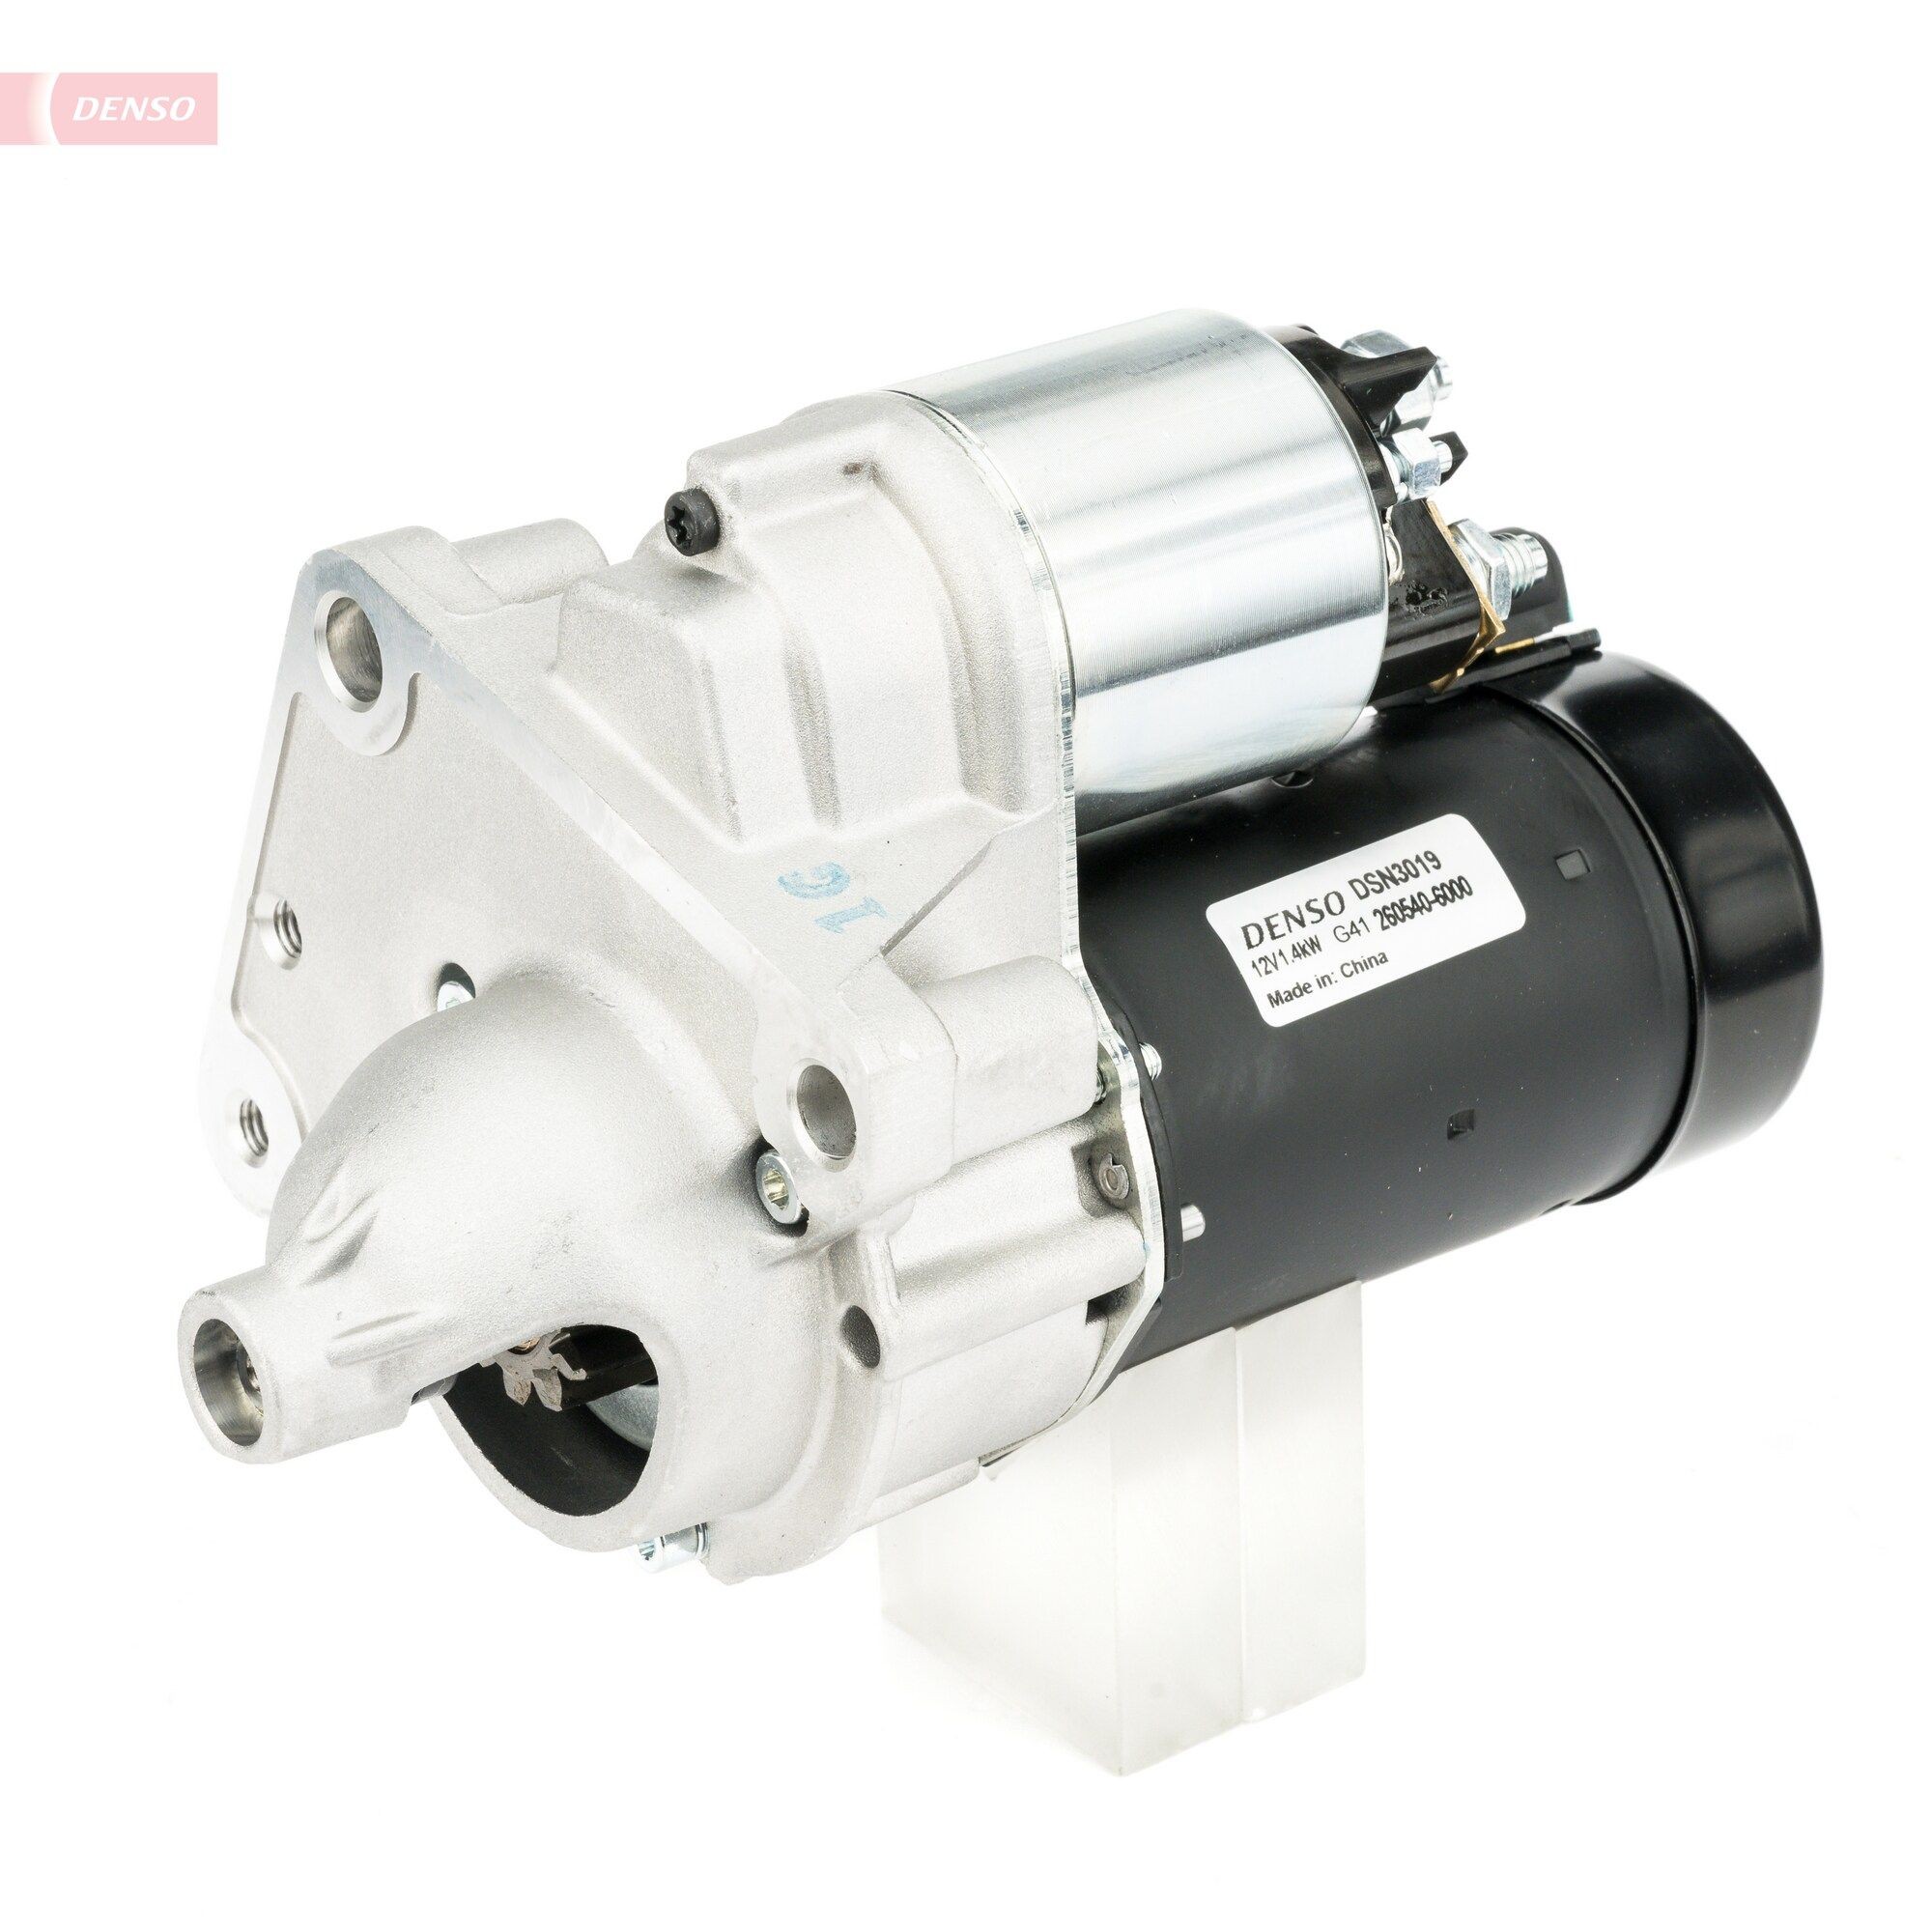 Original DSN3019 DENSO Starter experience and price